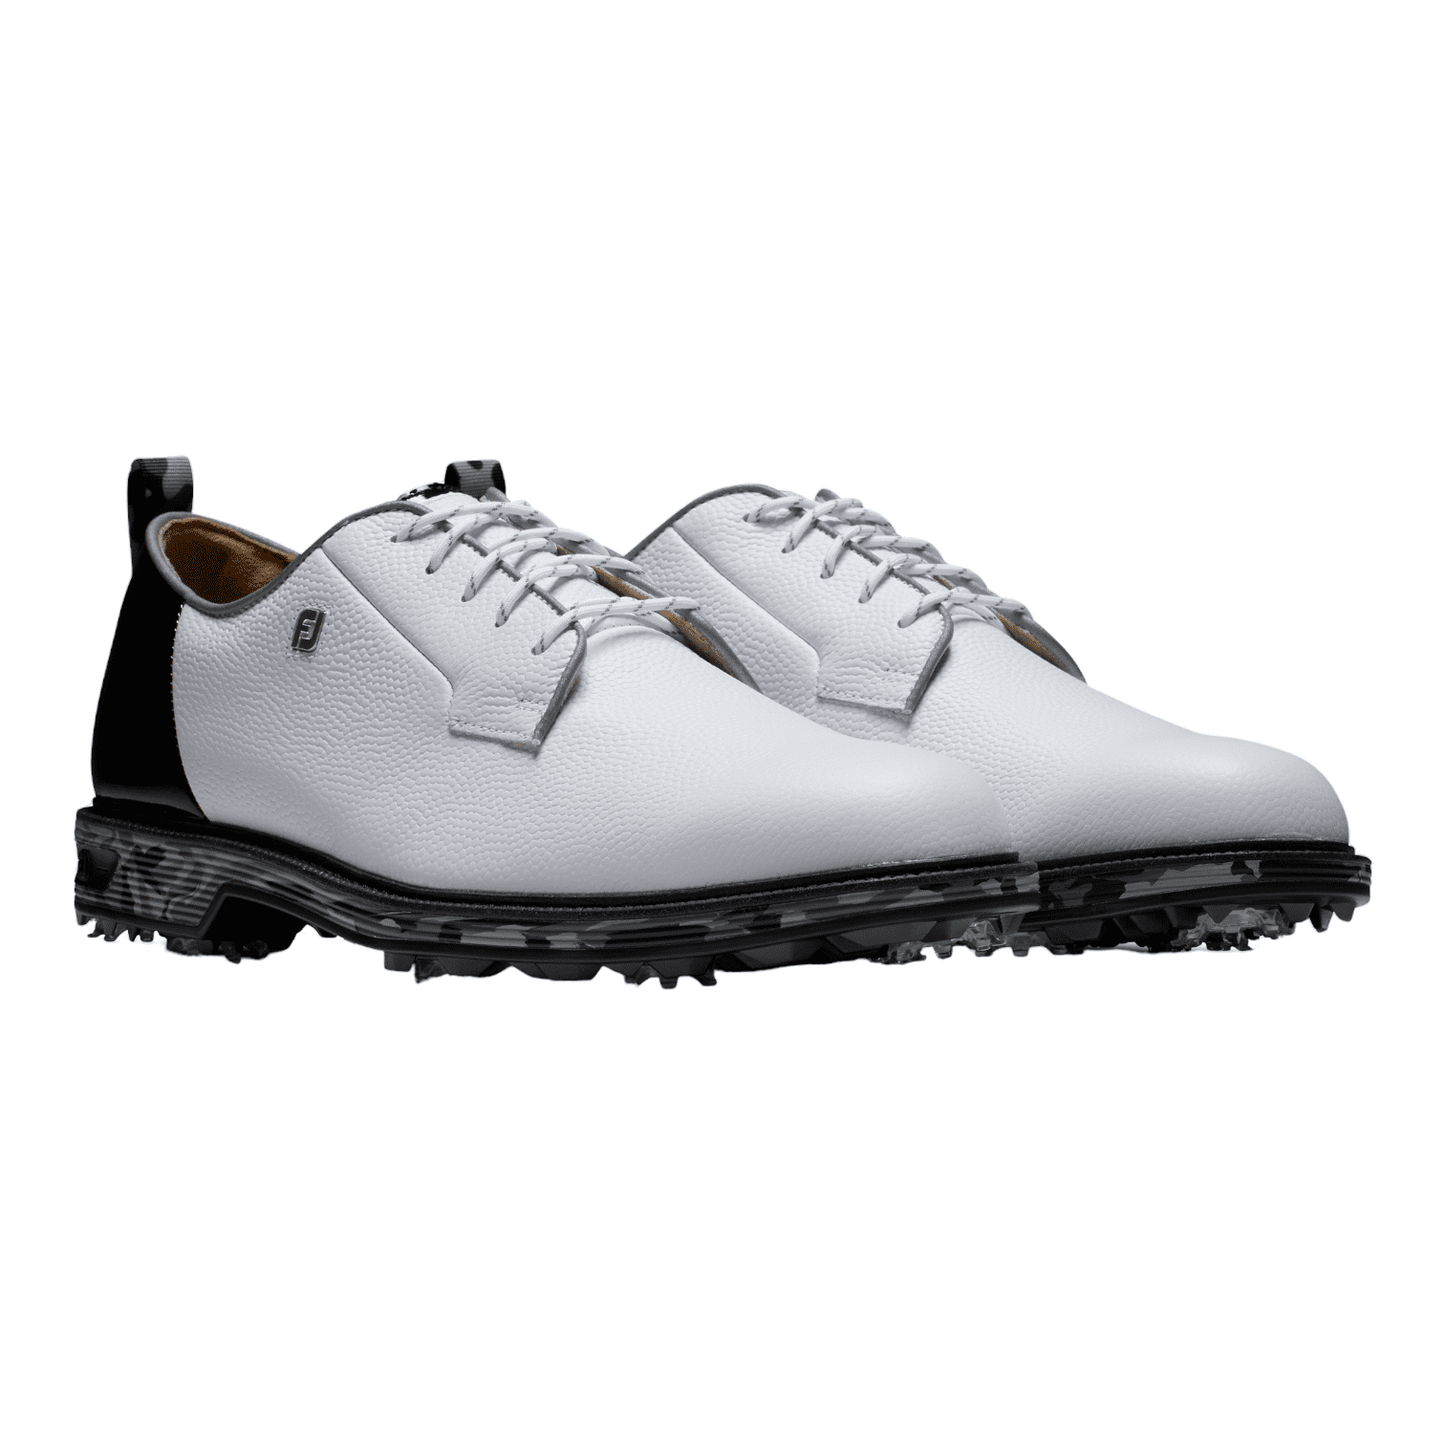 Footjoy Premiere LE Todd Snyder Packard Golf Shoes 54359